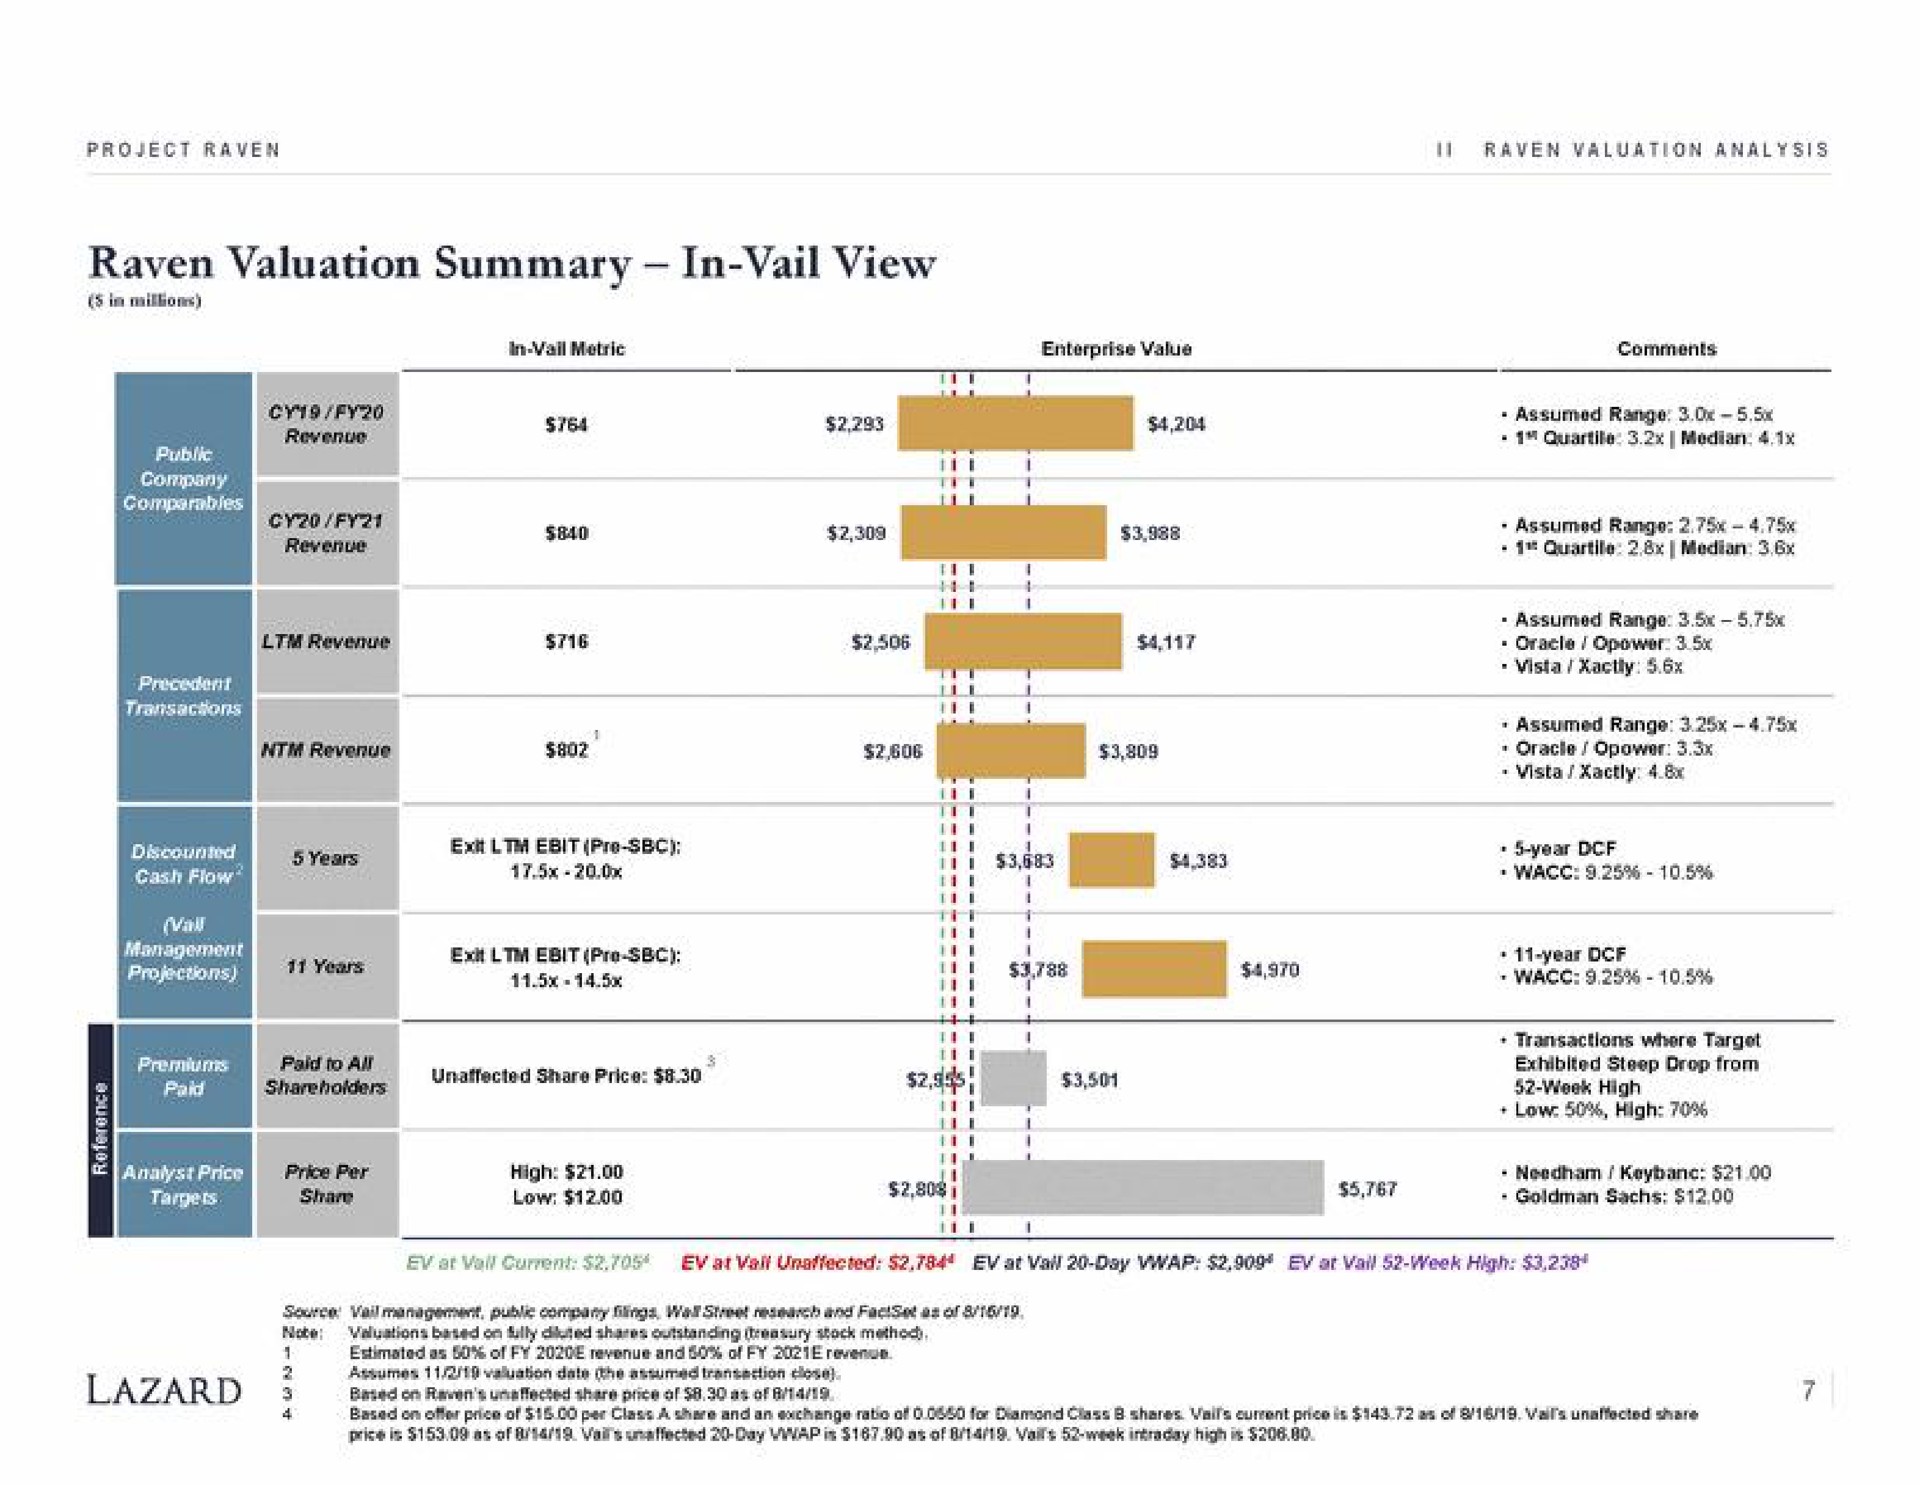 raven valuation summary in vail view ate i share price low at i median | Lazard